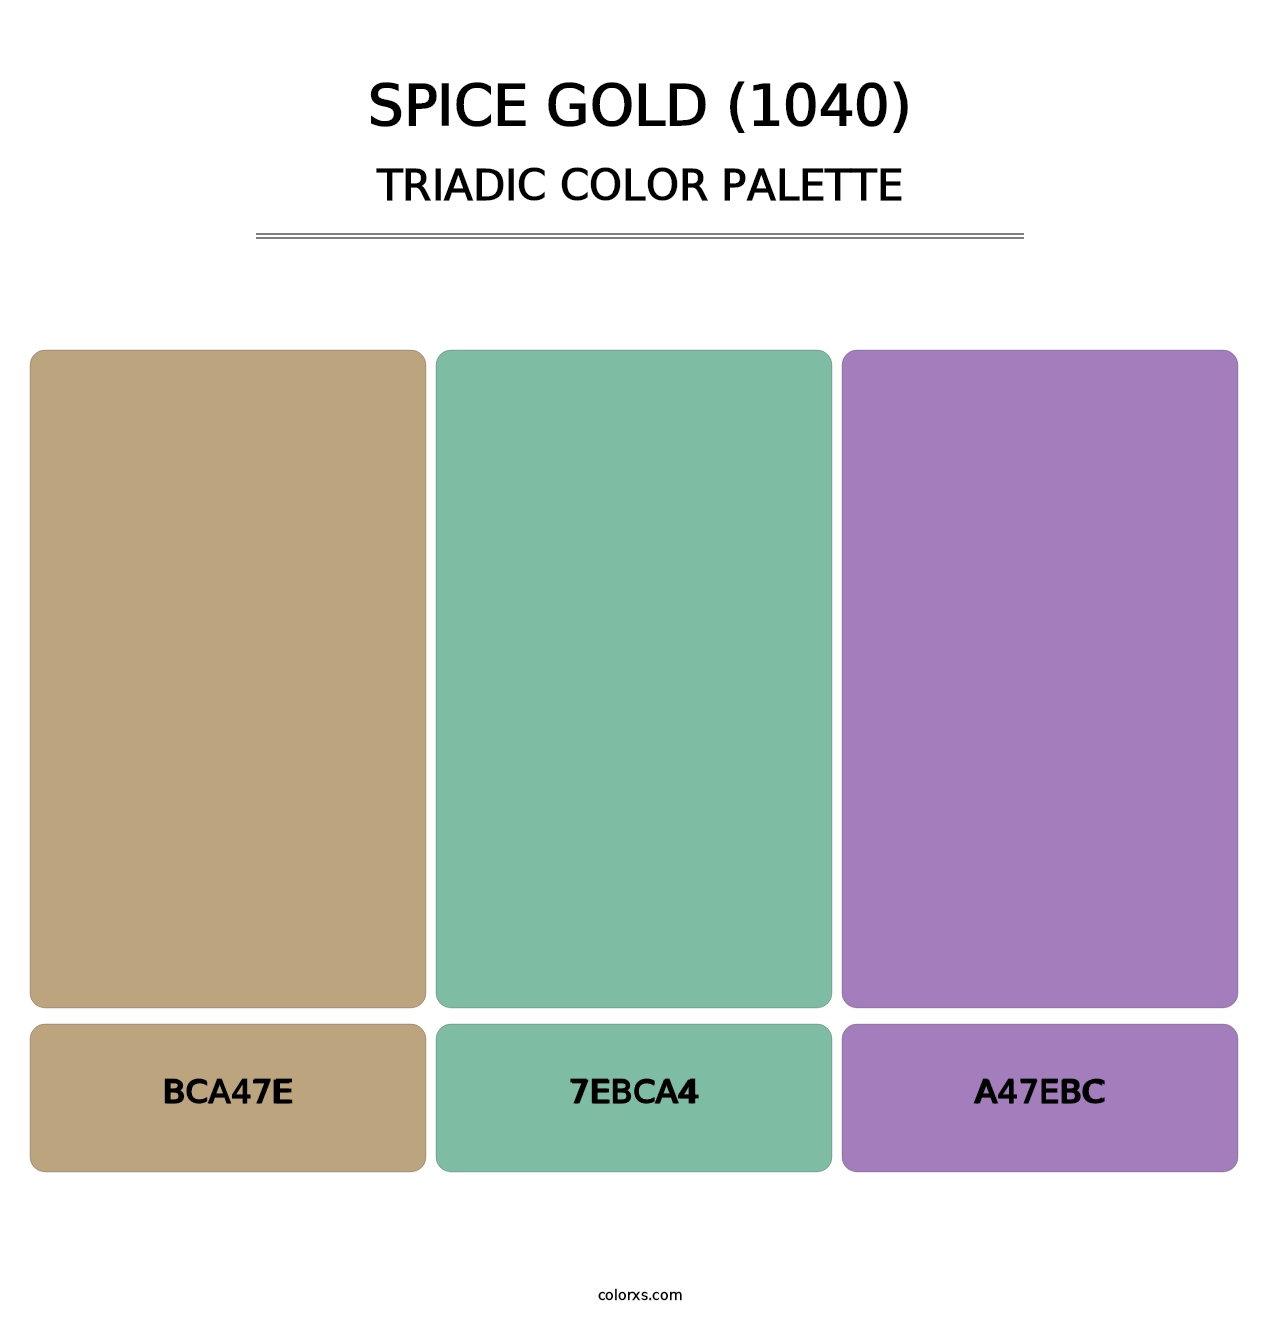 Spice Gold (1040) - Triadic Color Palette